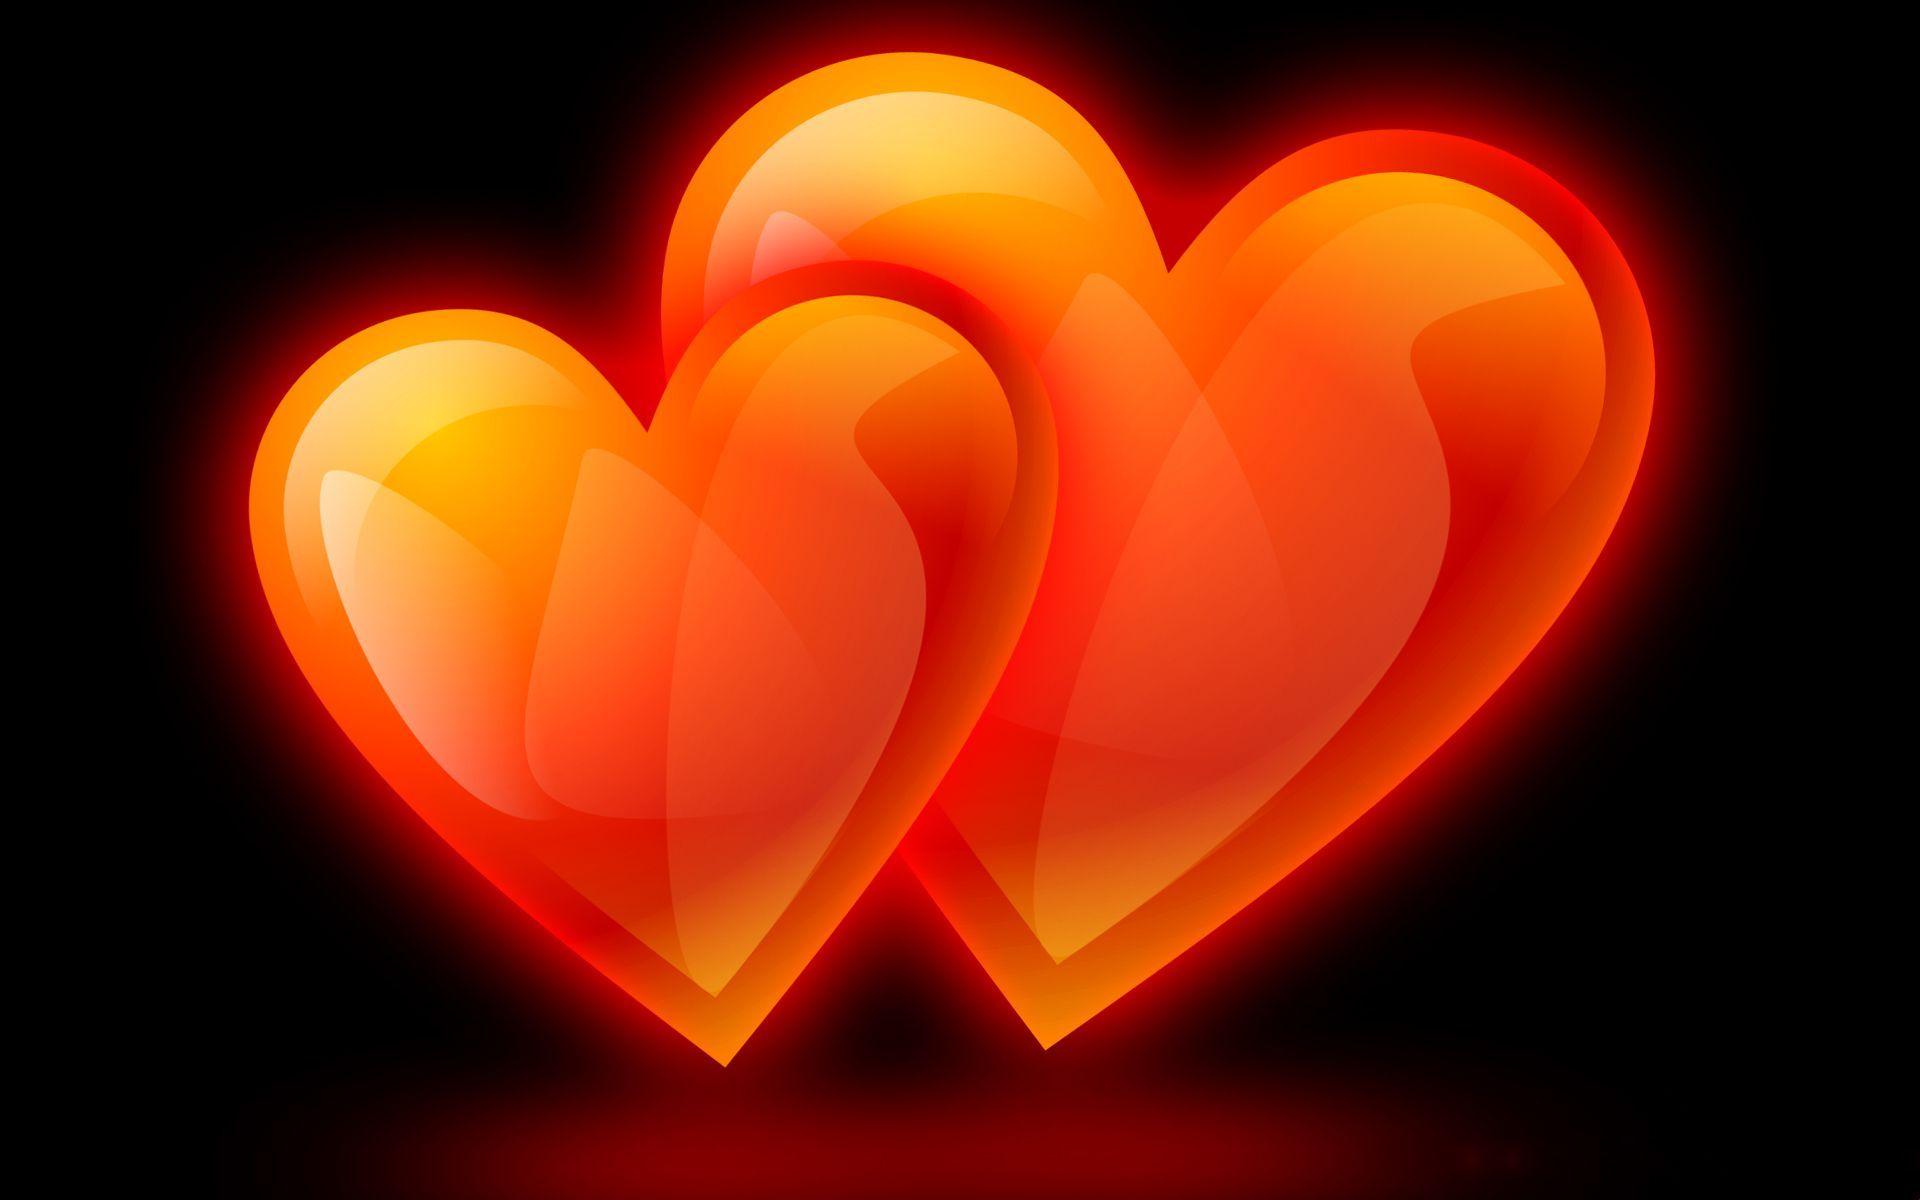 Black And Red Heart Wallpapers Image & Pictures